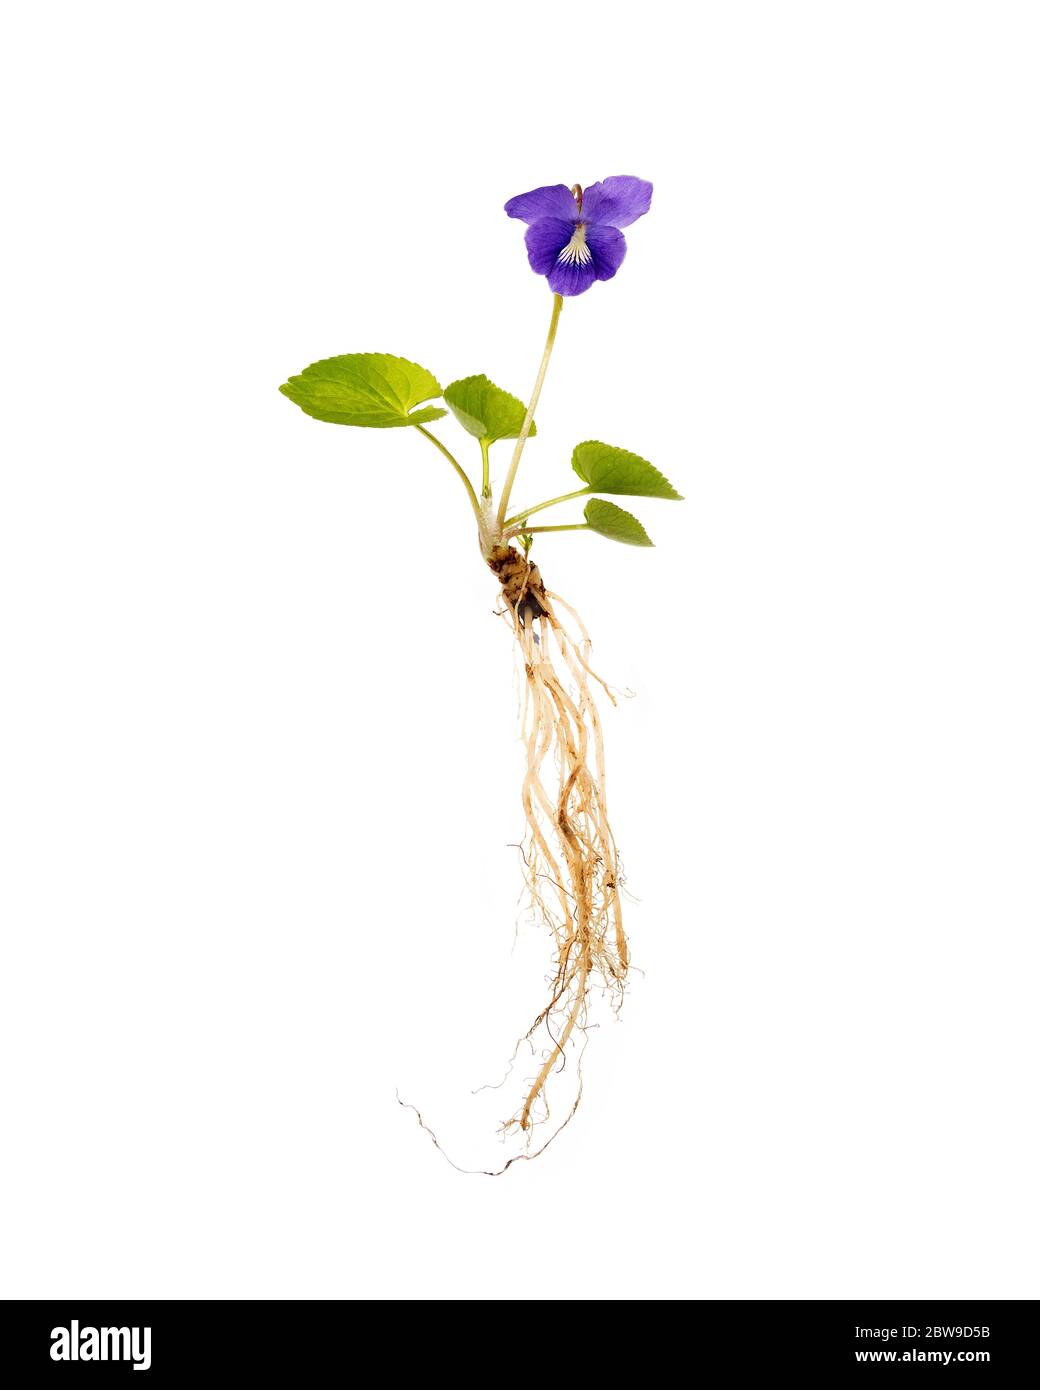 Wild violet (Viola sororia) on white background, showing entire plant (roots, stems, leaves, flowers) Stock Photo